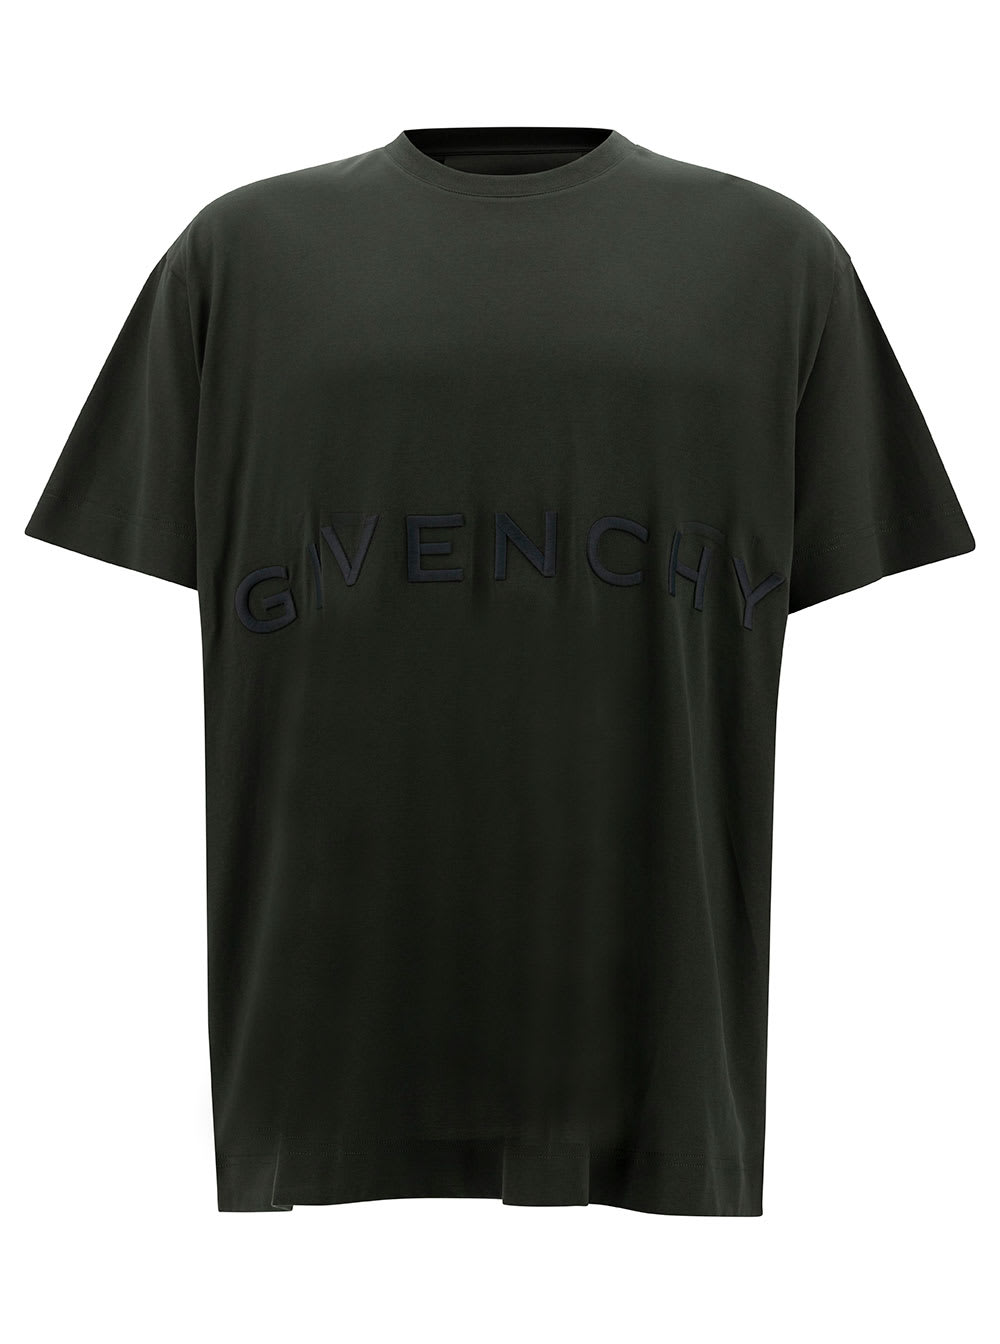 GIVENCHY GIVENCHY 4G OVERSIZED T-SHIRT IN GREY GREEN COTTON